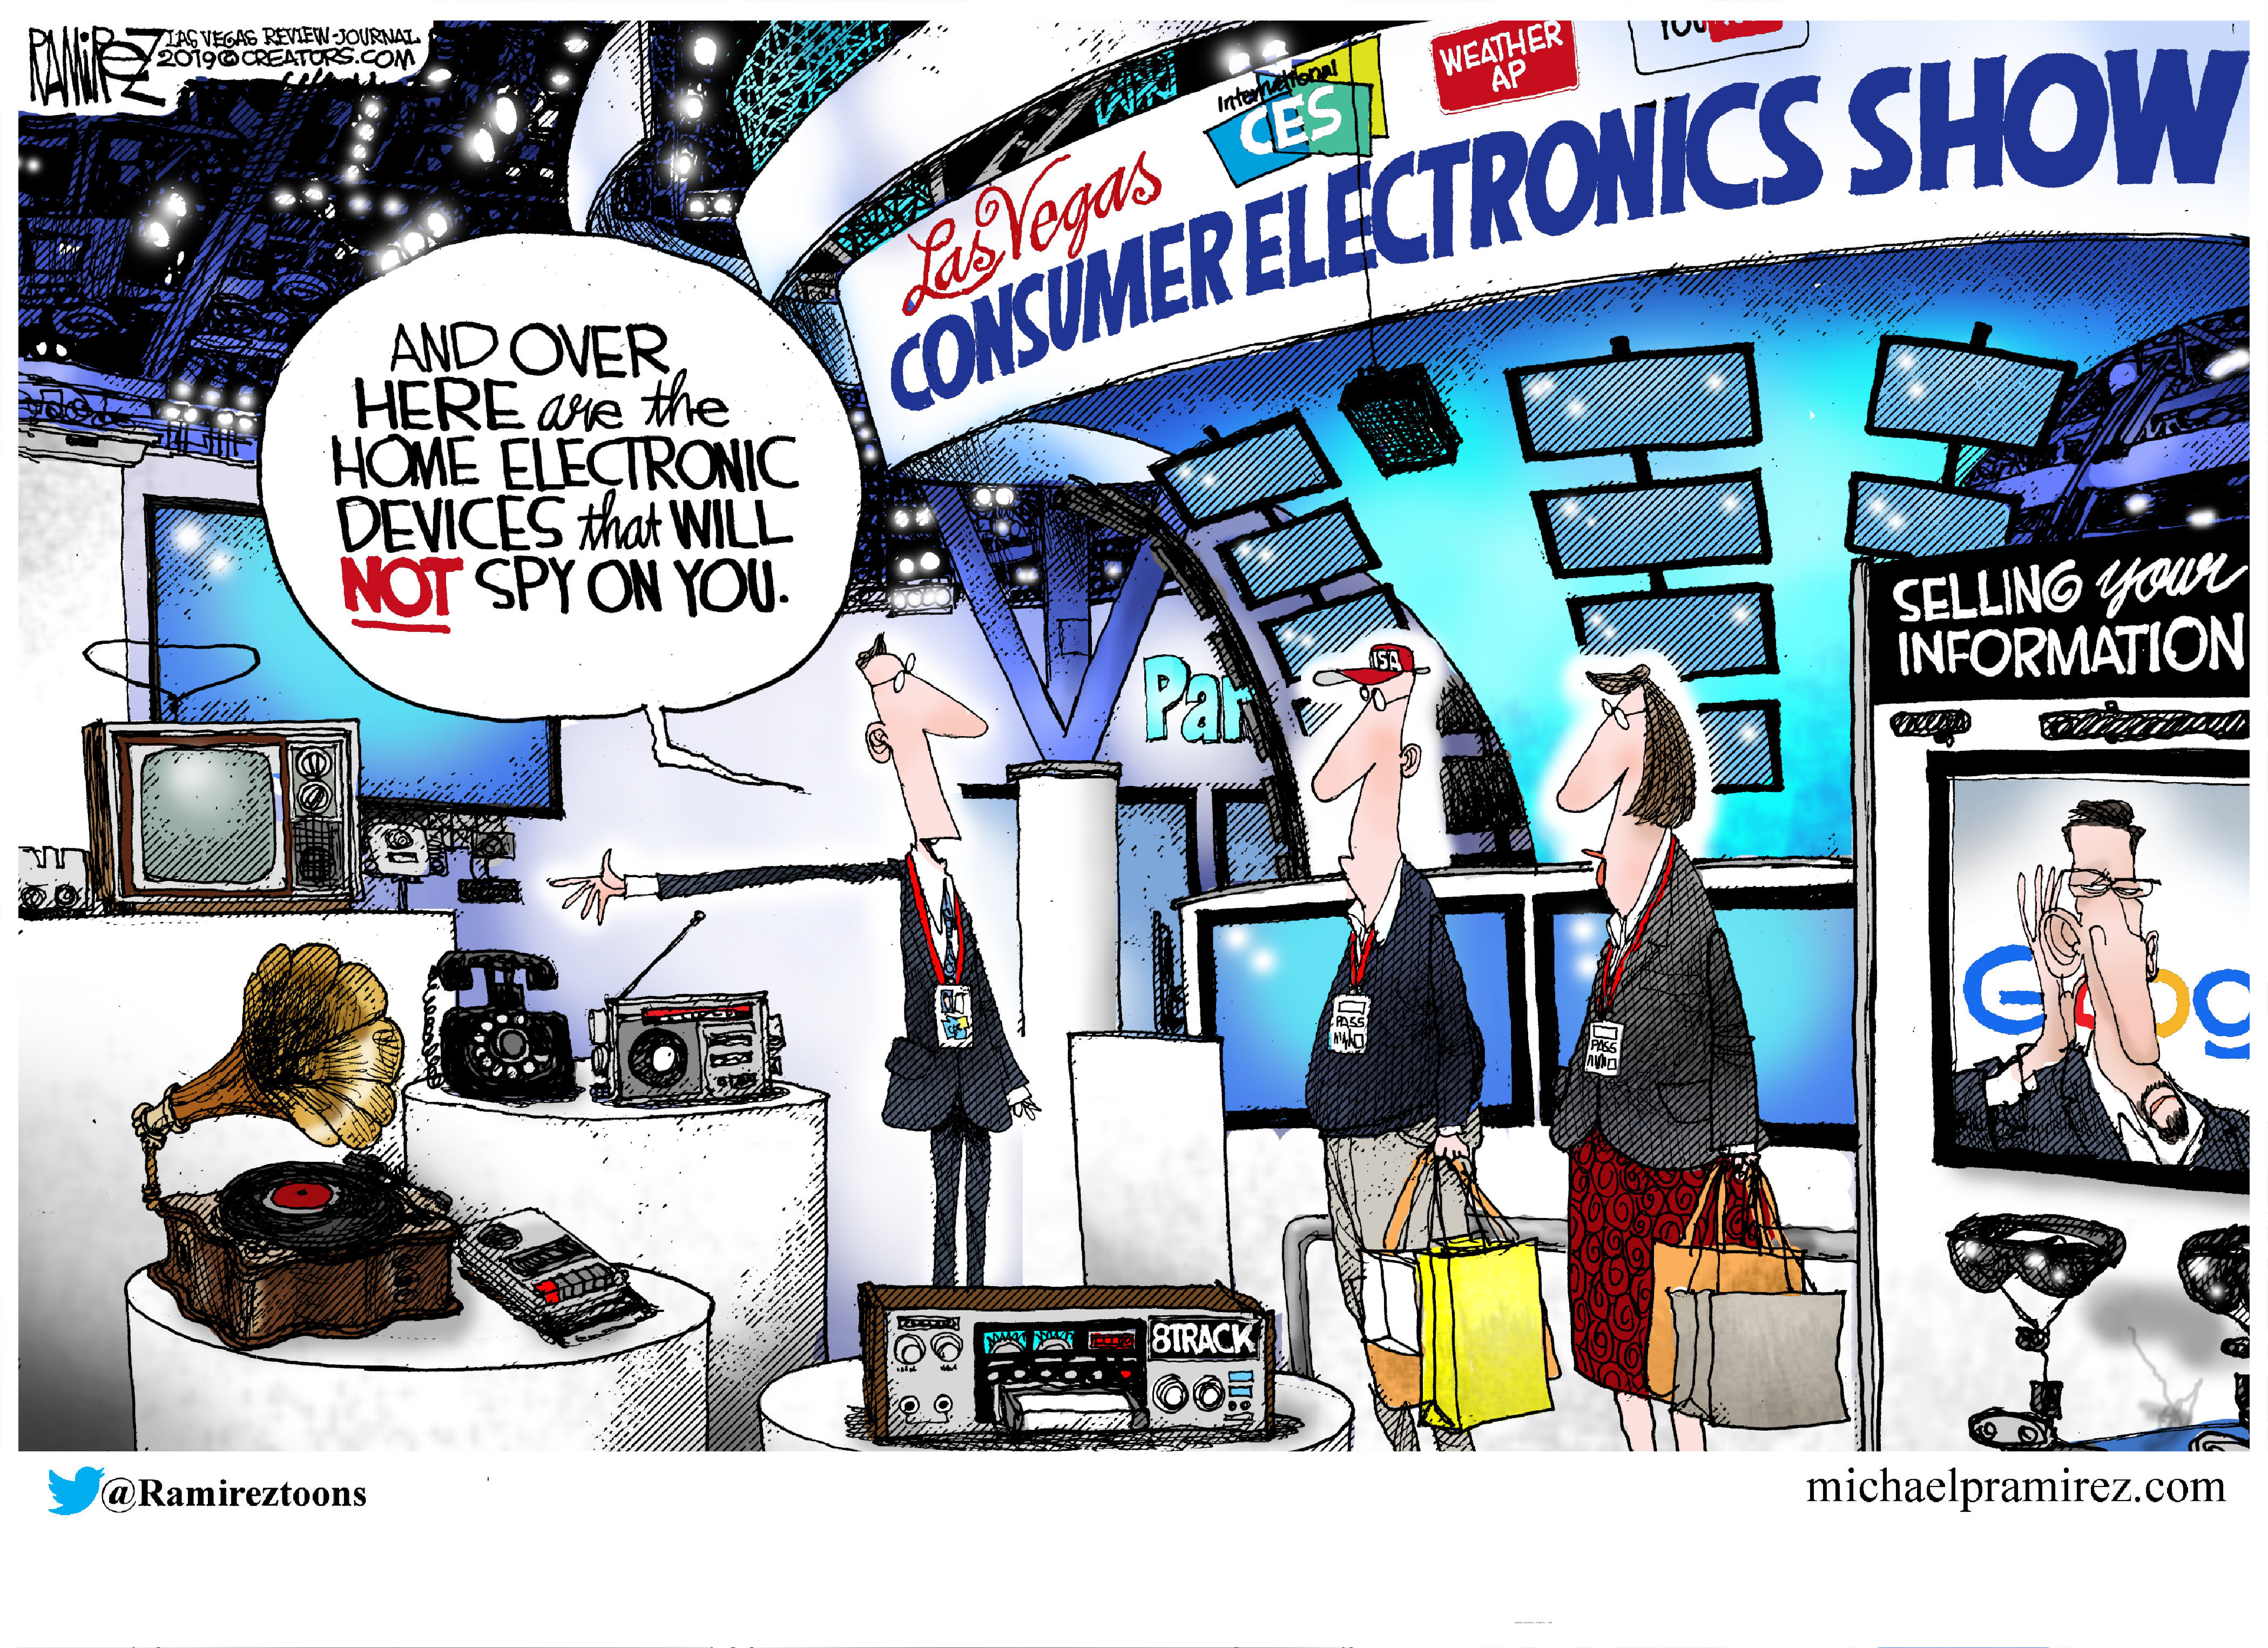 Editorial cartoon . Consumer Electronics Show spying devices